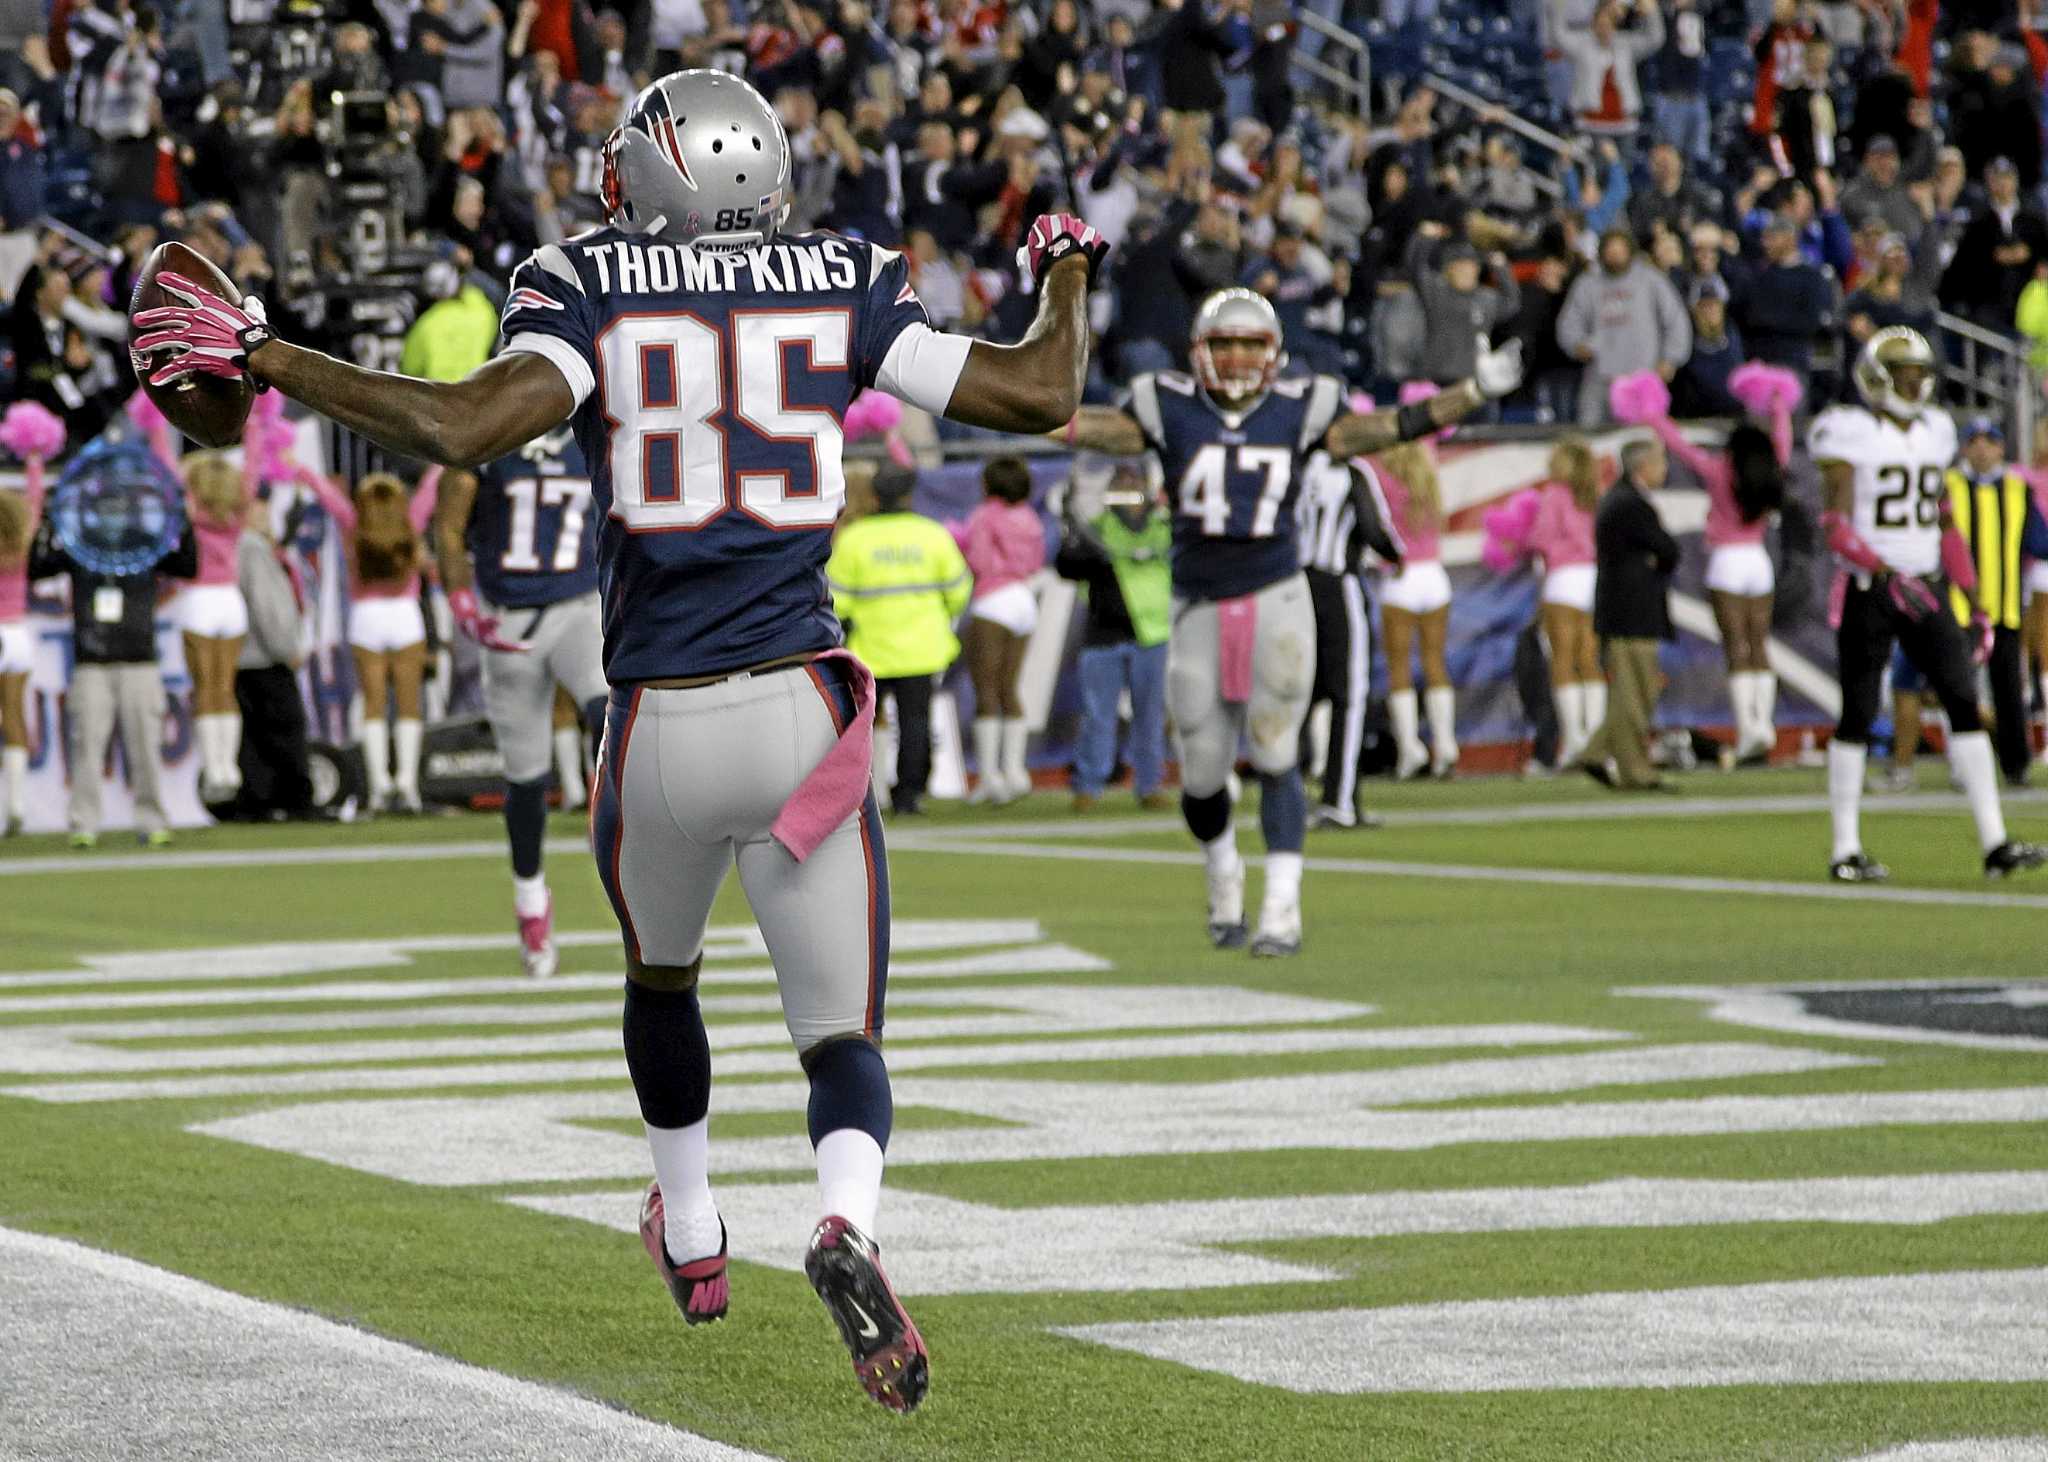 Practice makes perfect for Patriots WR Kenbrell Thompkins